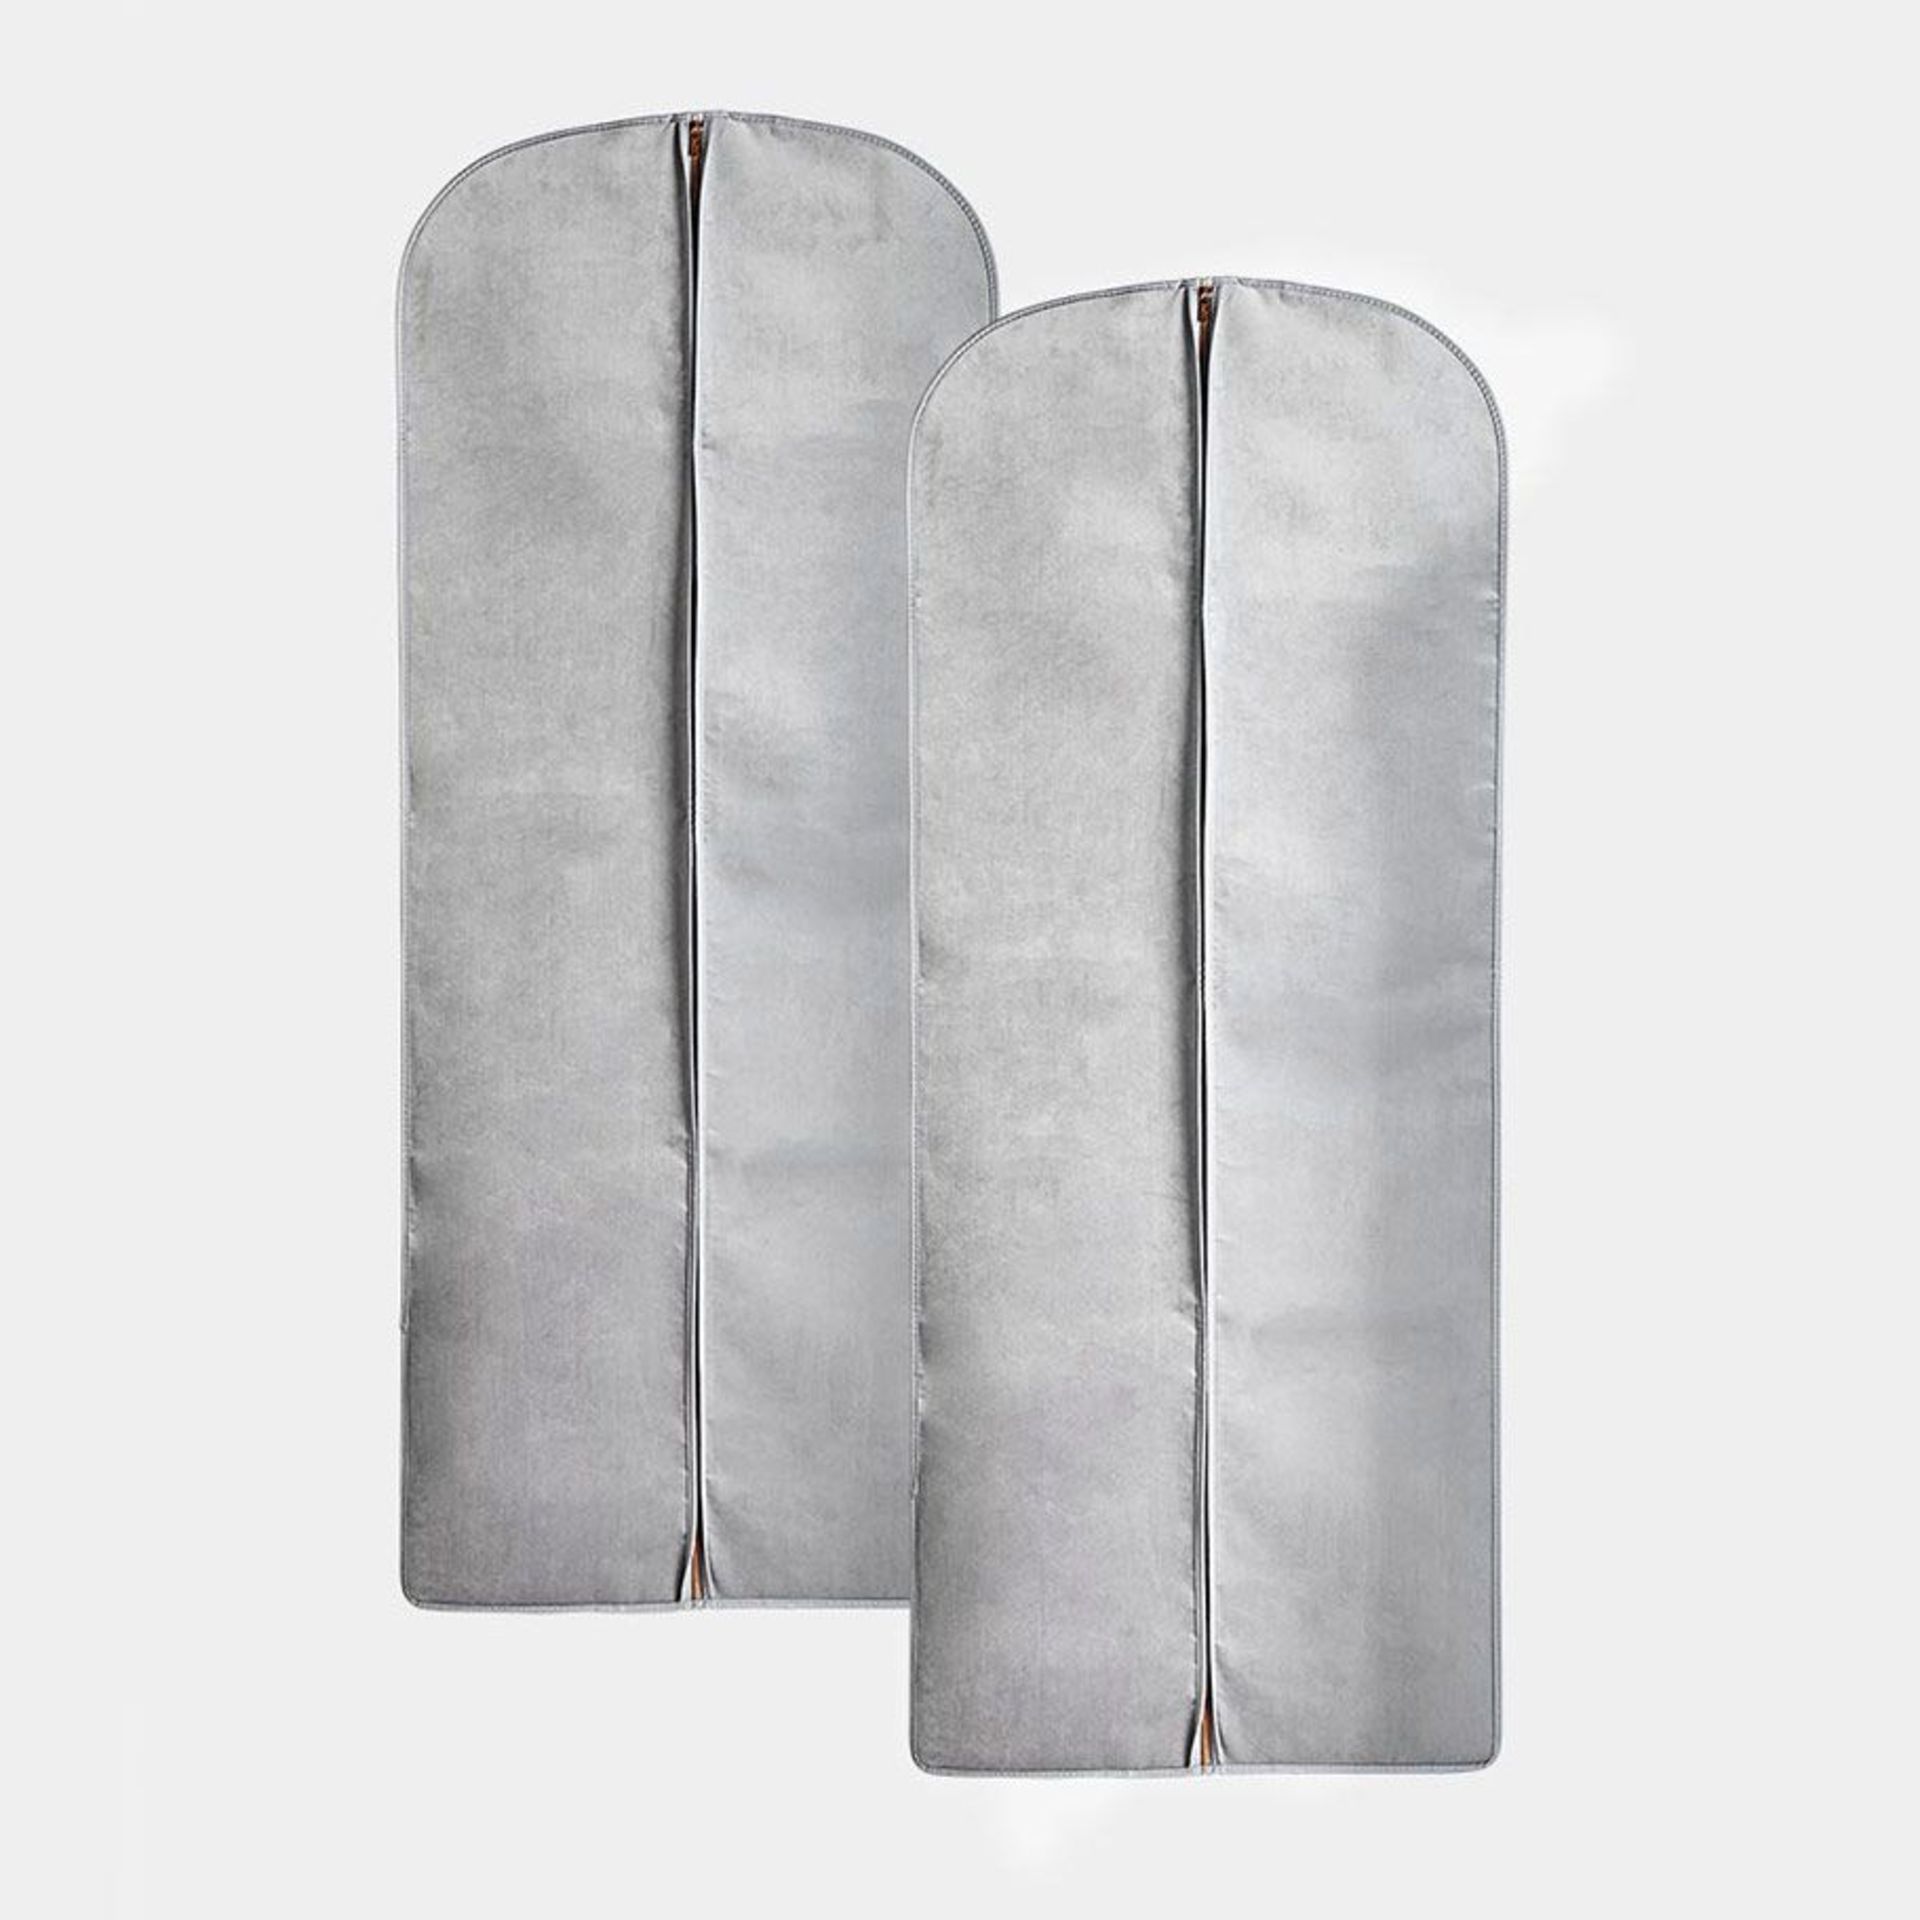 10 x New & Packaged Sets of Beautify Grey & Rose Gold Garment Bags. RRP £29.99 per set. (9200050). - Image 4 of 4